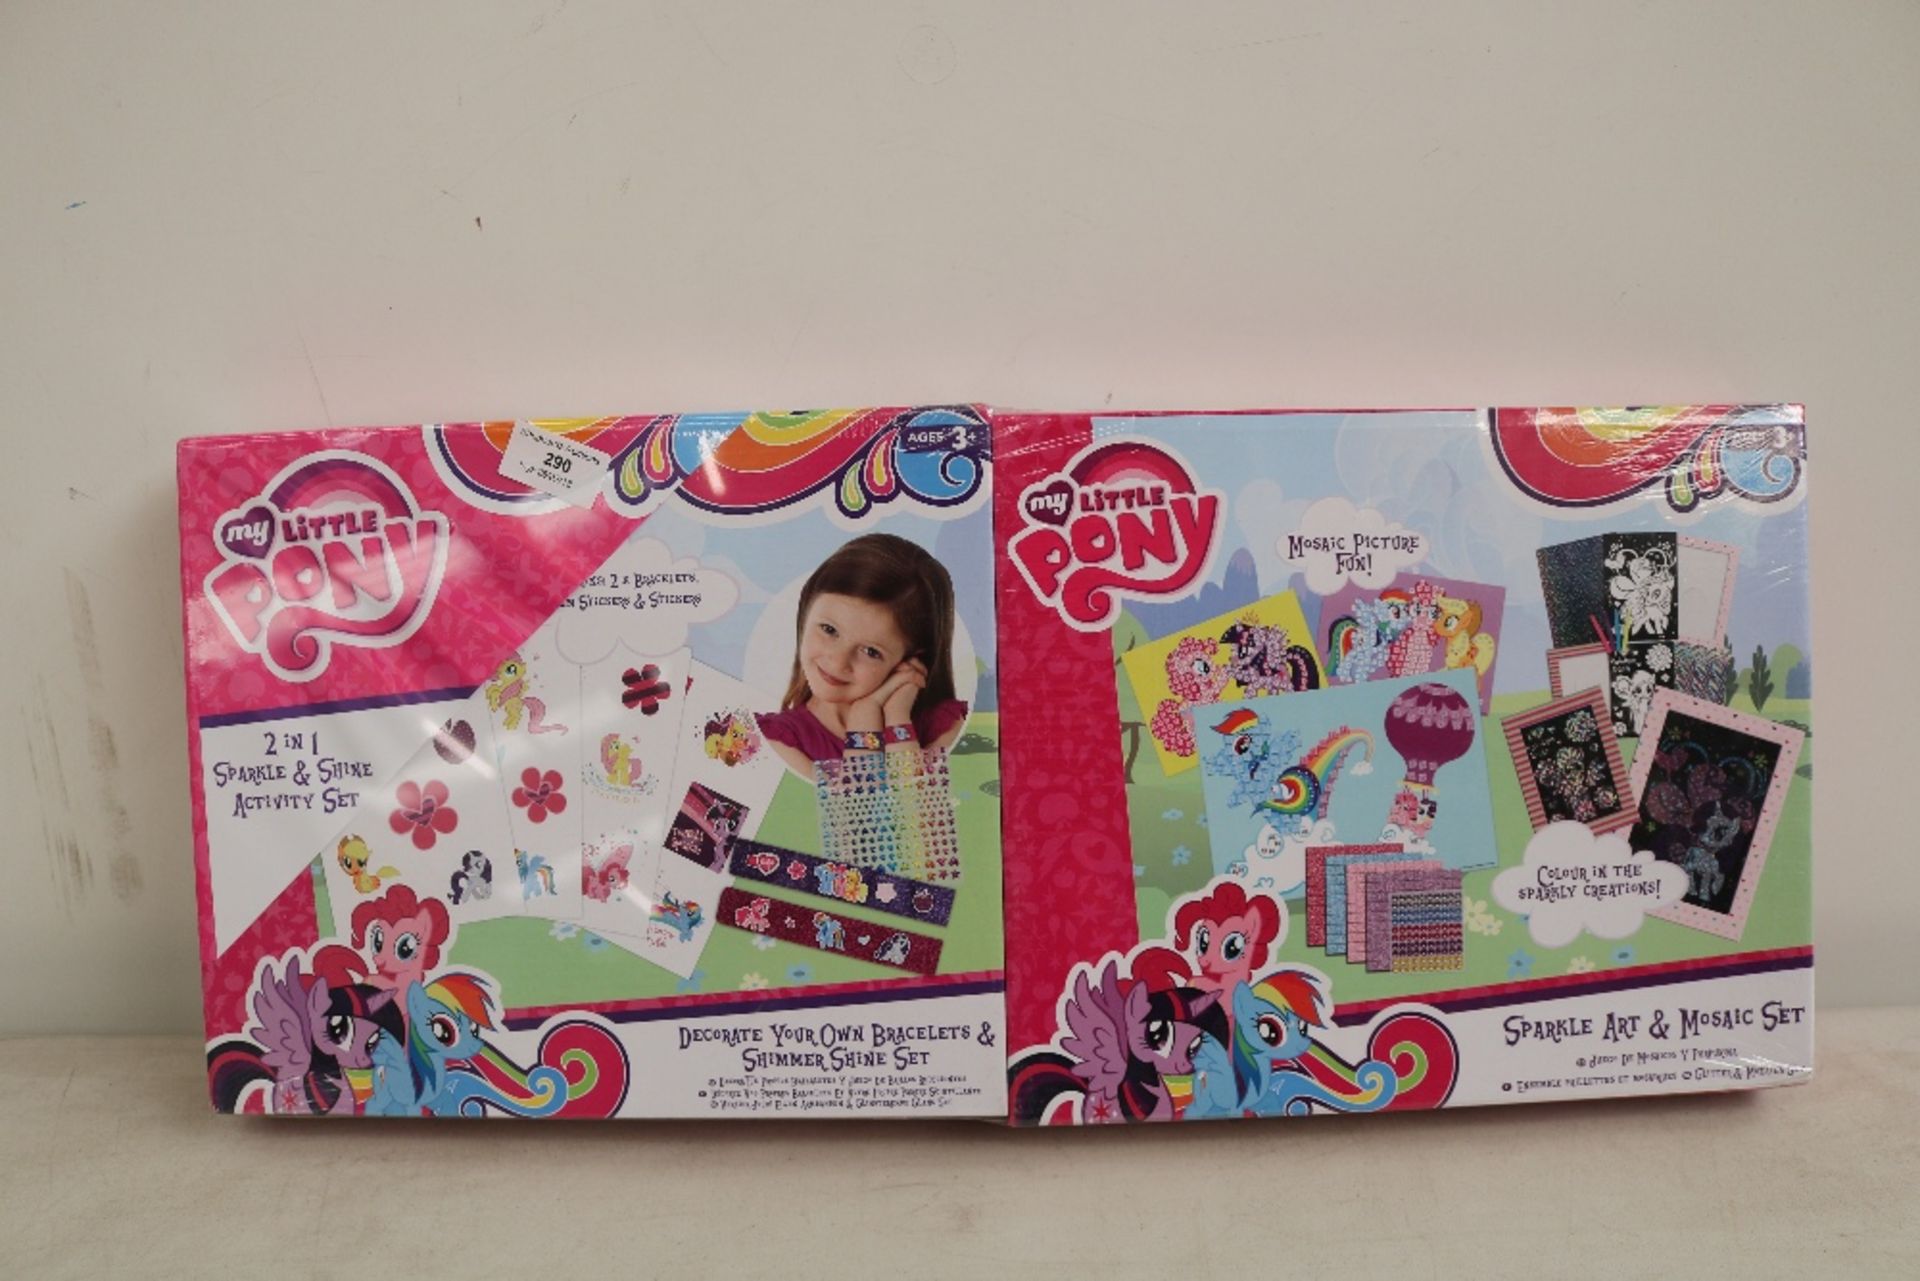 My Little Pony decorate your own bracelets & shimmer shine set, as well as sparkle art and mosaic